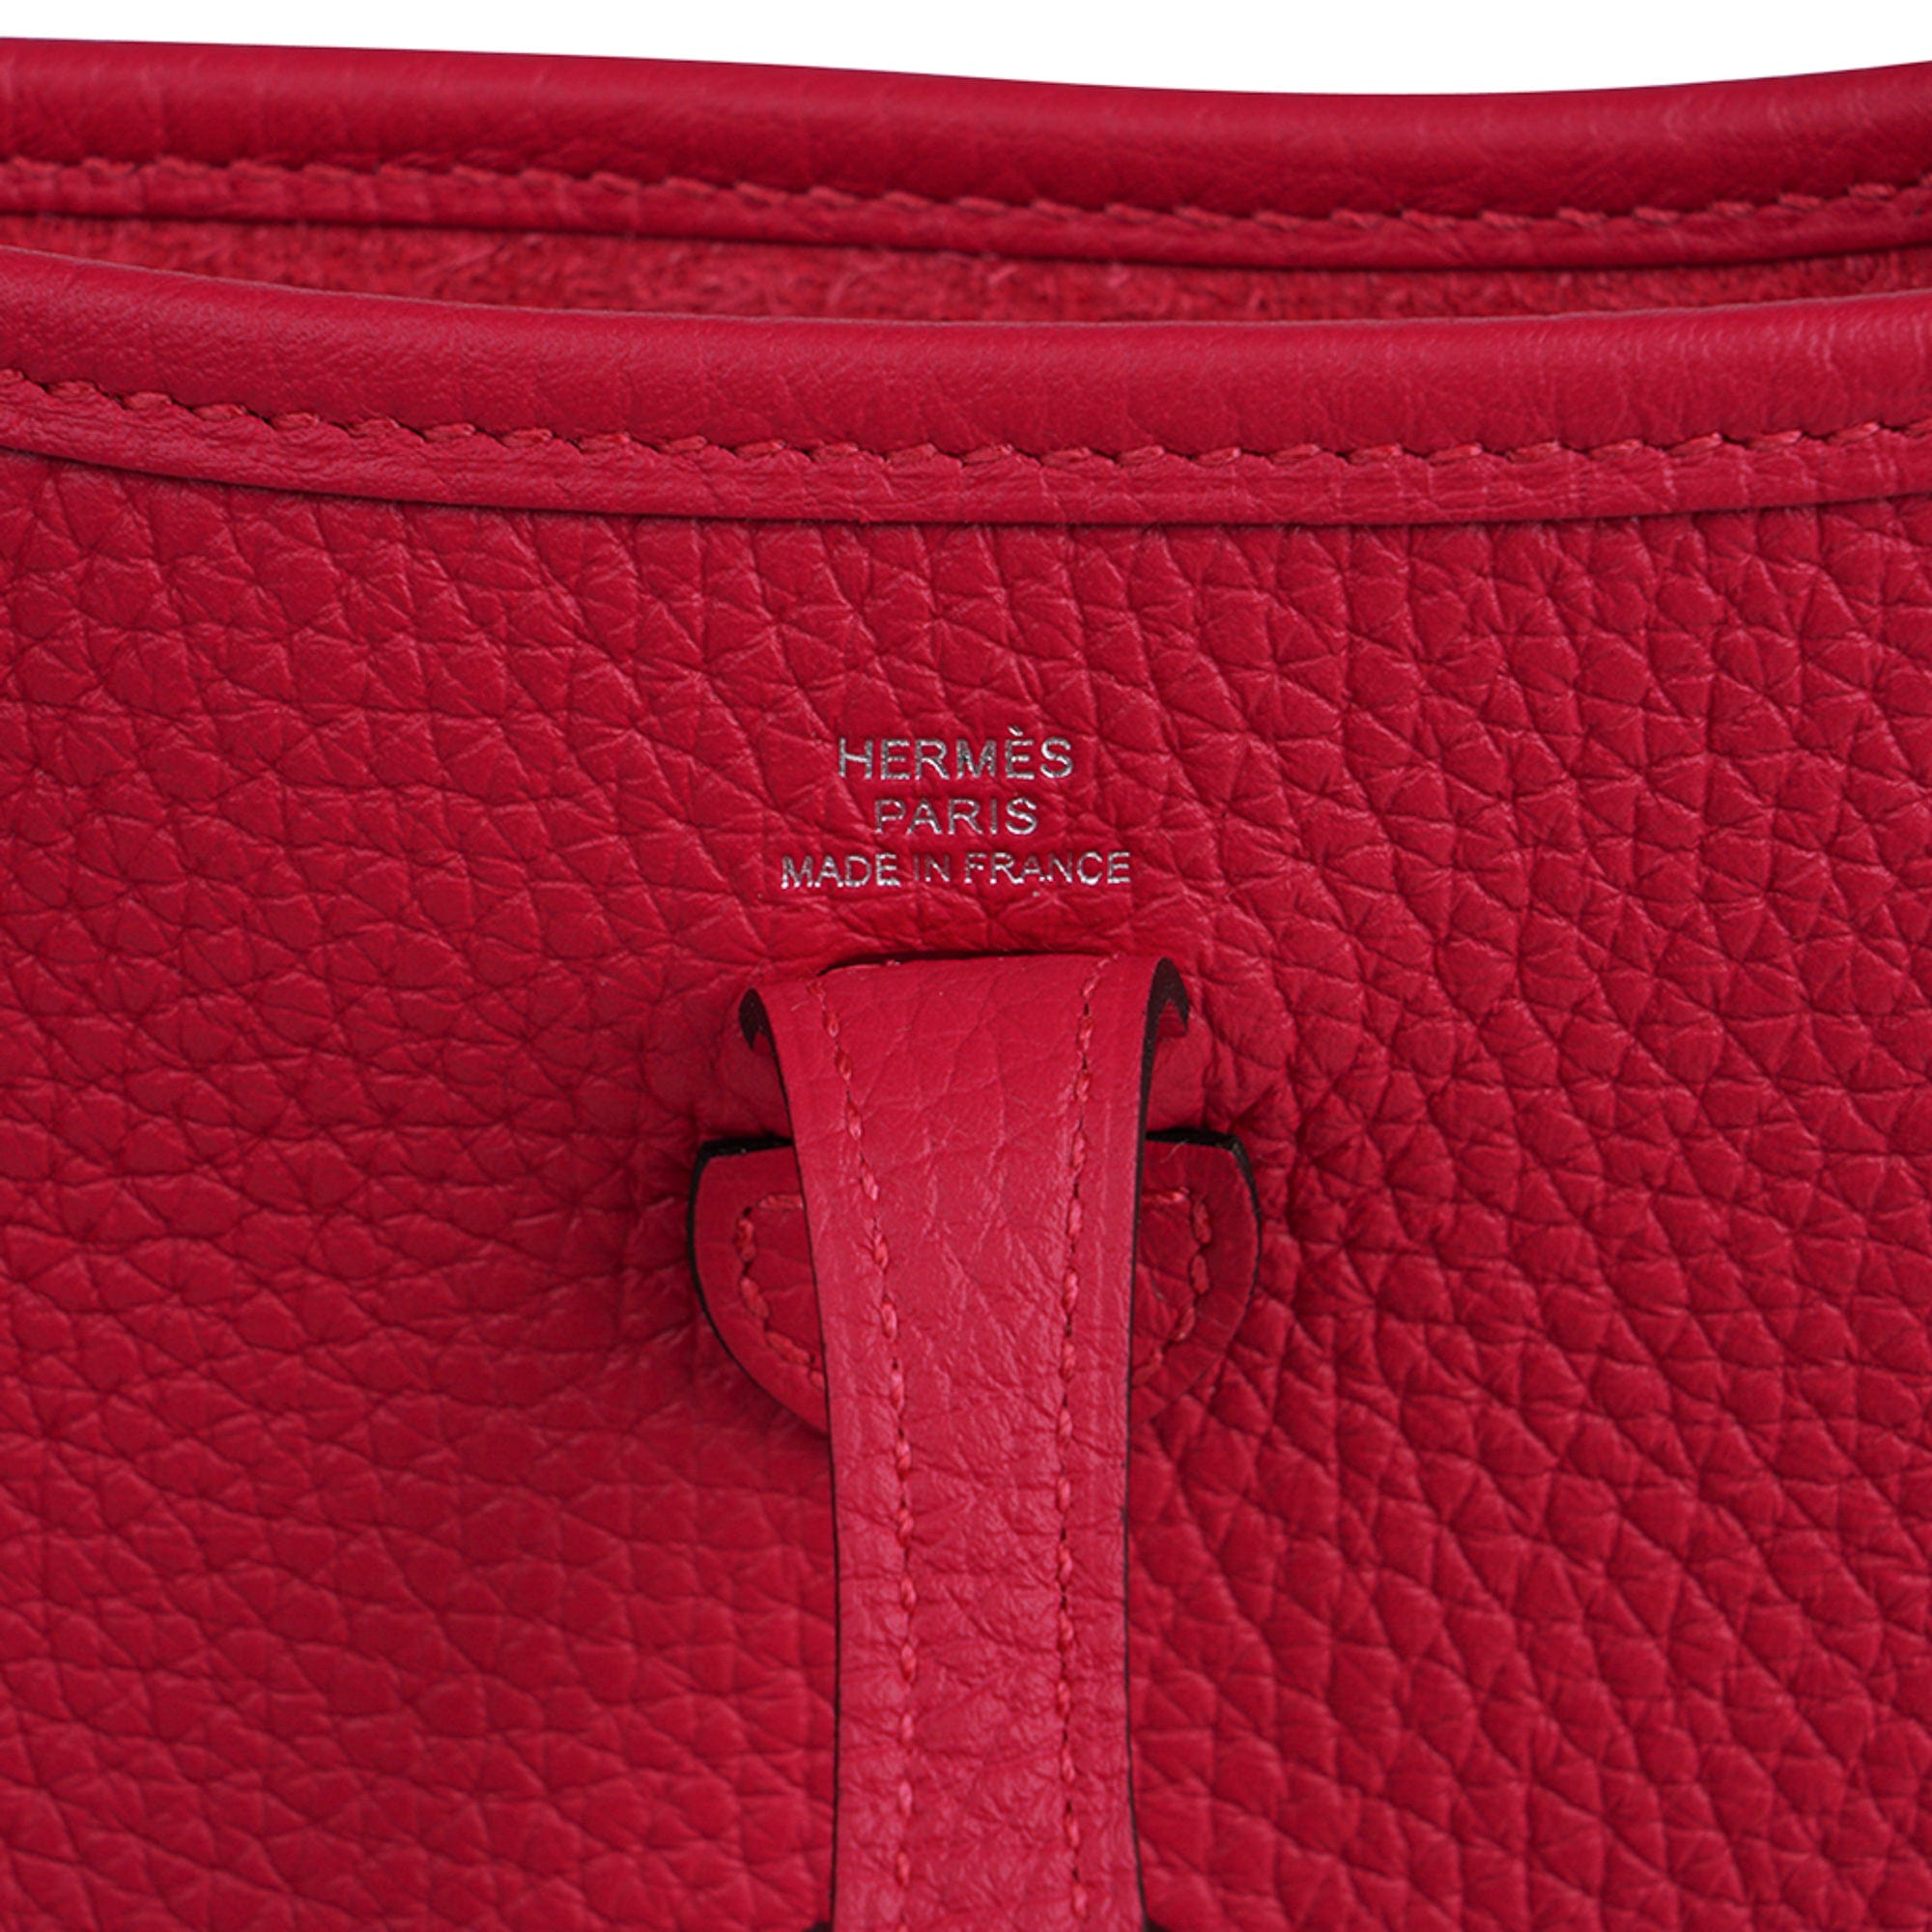 Hermes Mini Evelyne III TPM Bag Framboise Clemence Leather with Pallad –  Mightychic